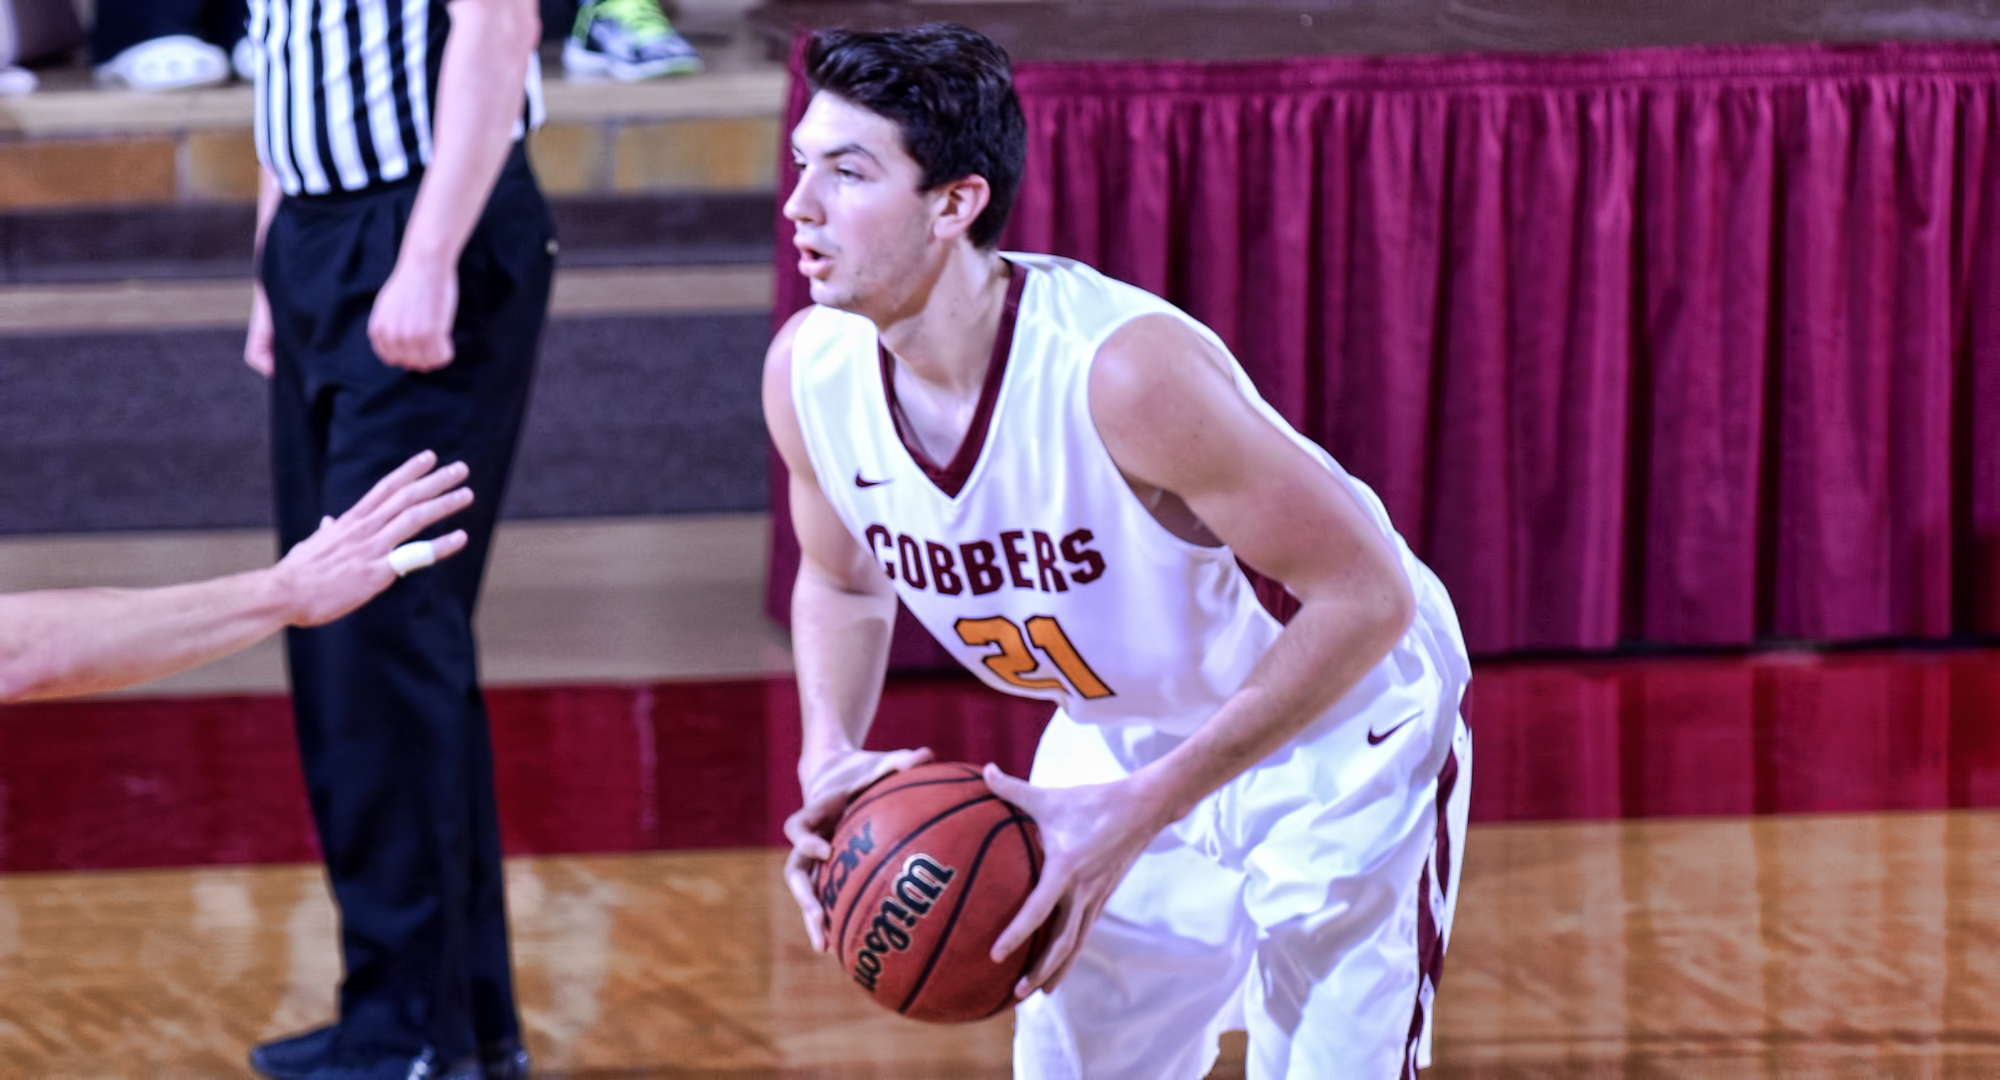 Sophomore Jacob Pazdernik scored a career-high 20 points in the Cobbers' non-conference game Valley City State.